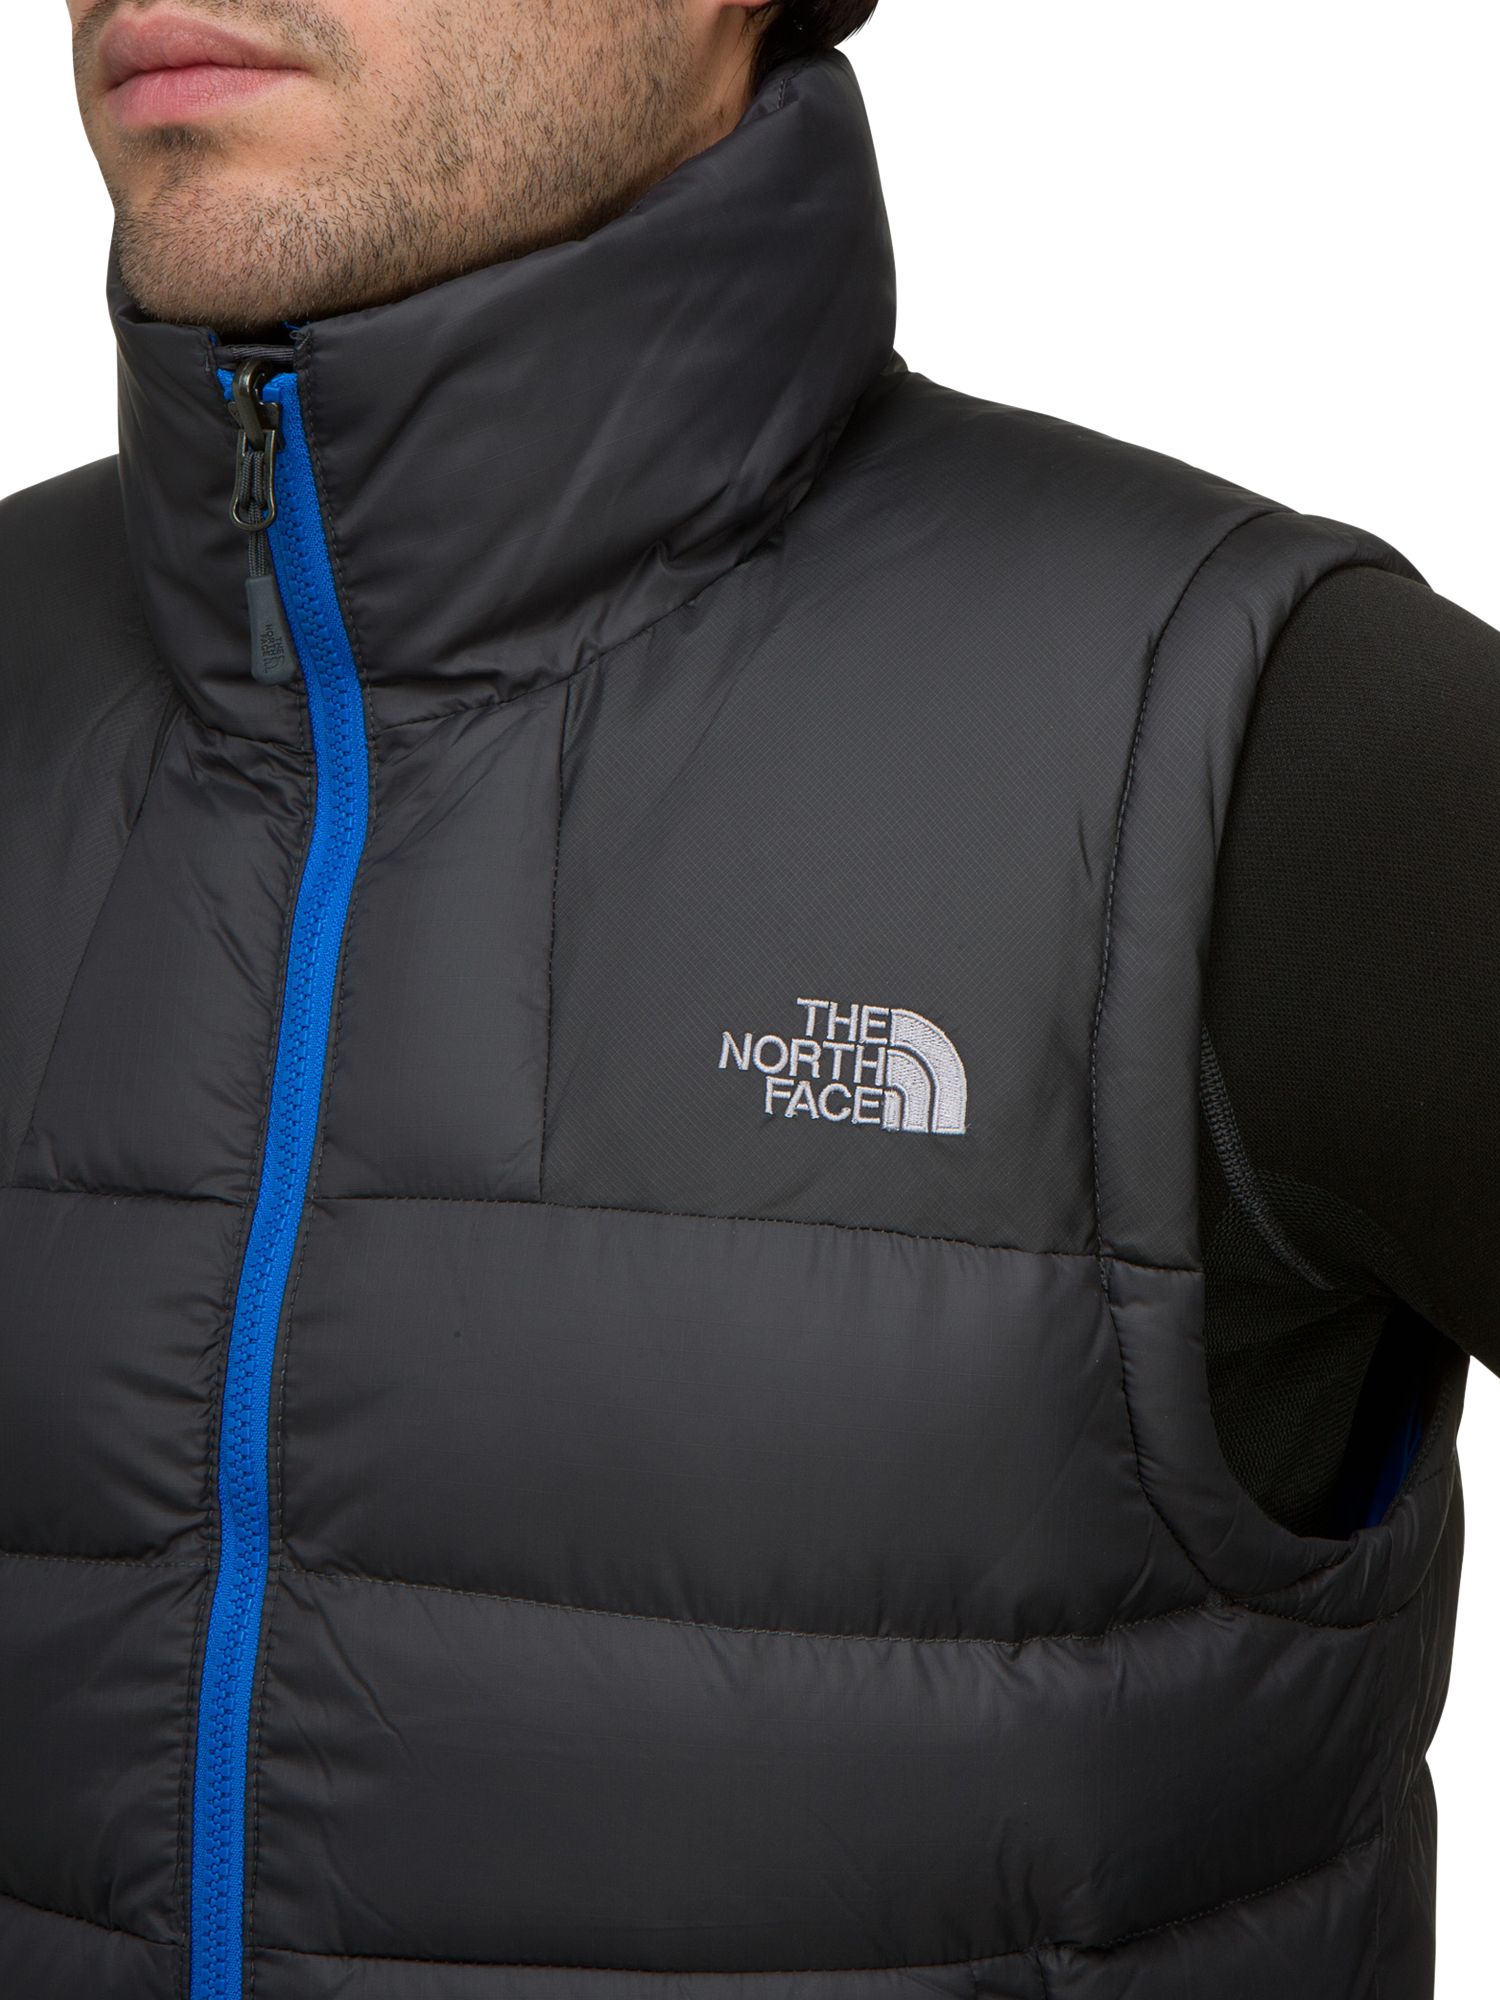 the north face massif vest